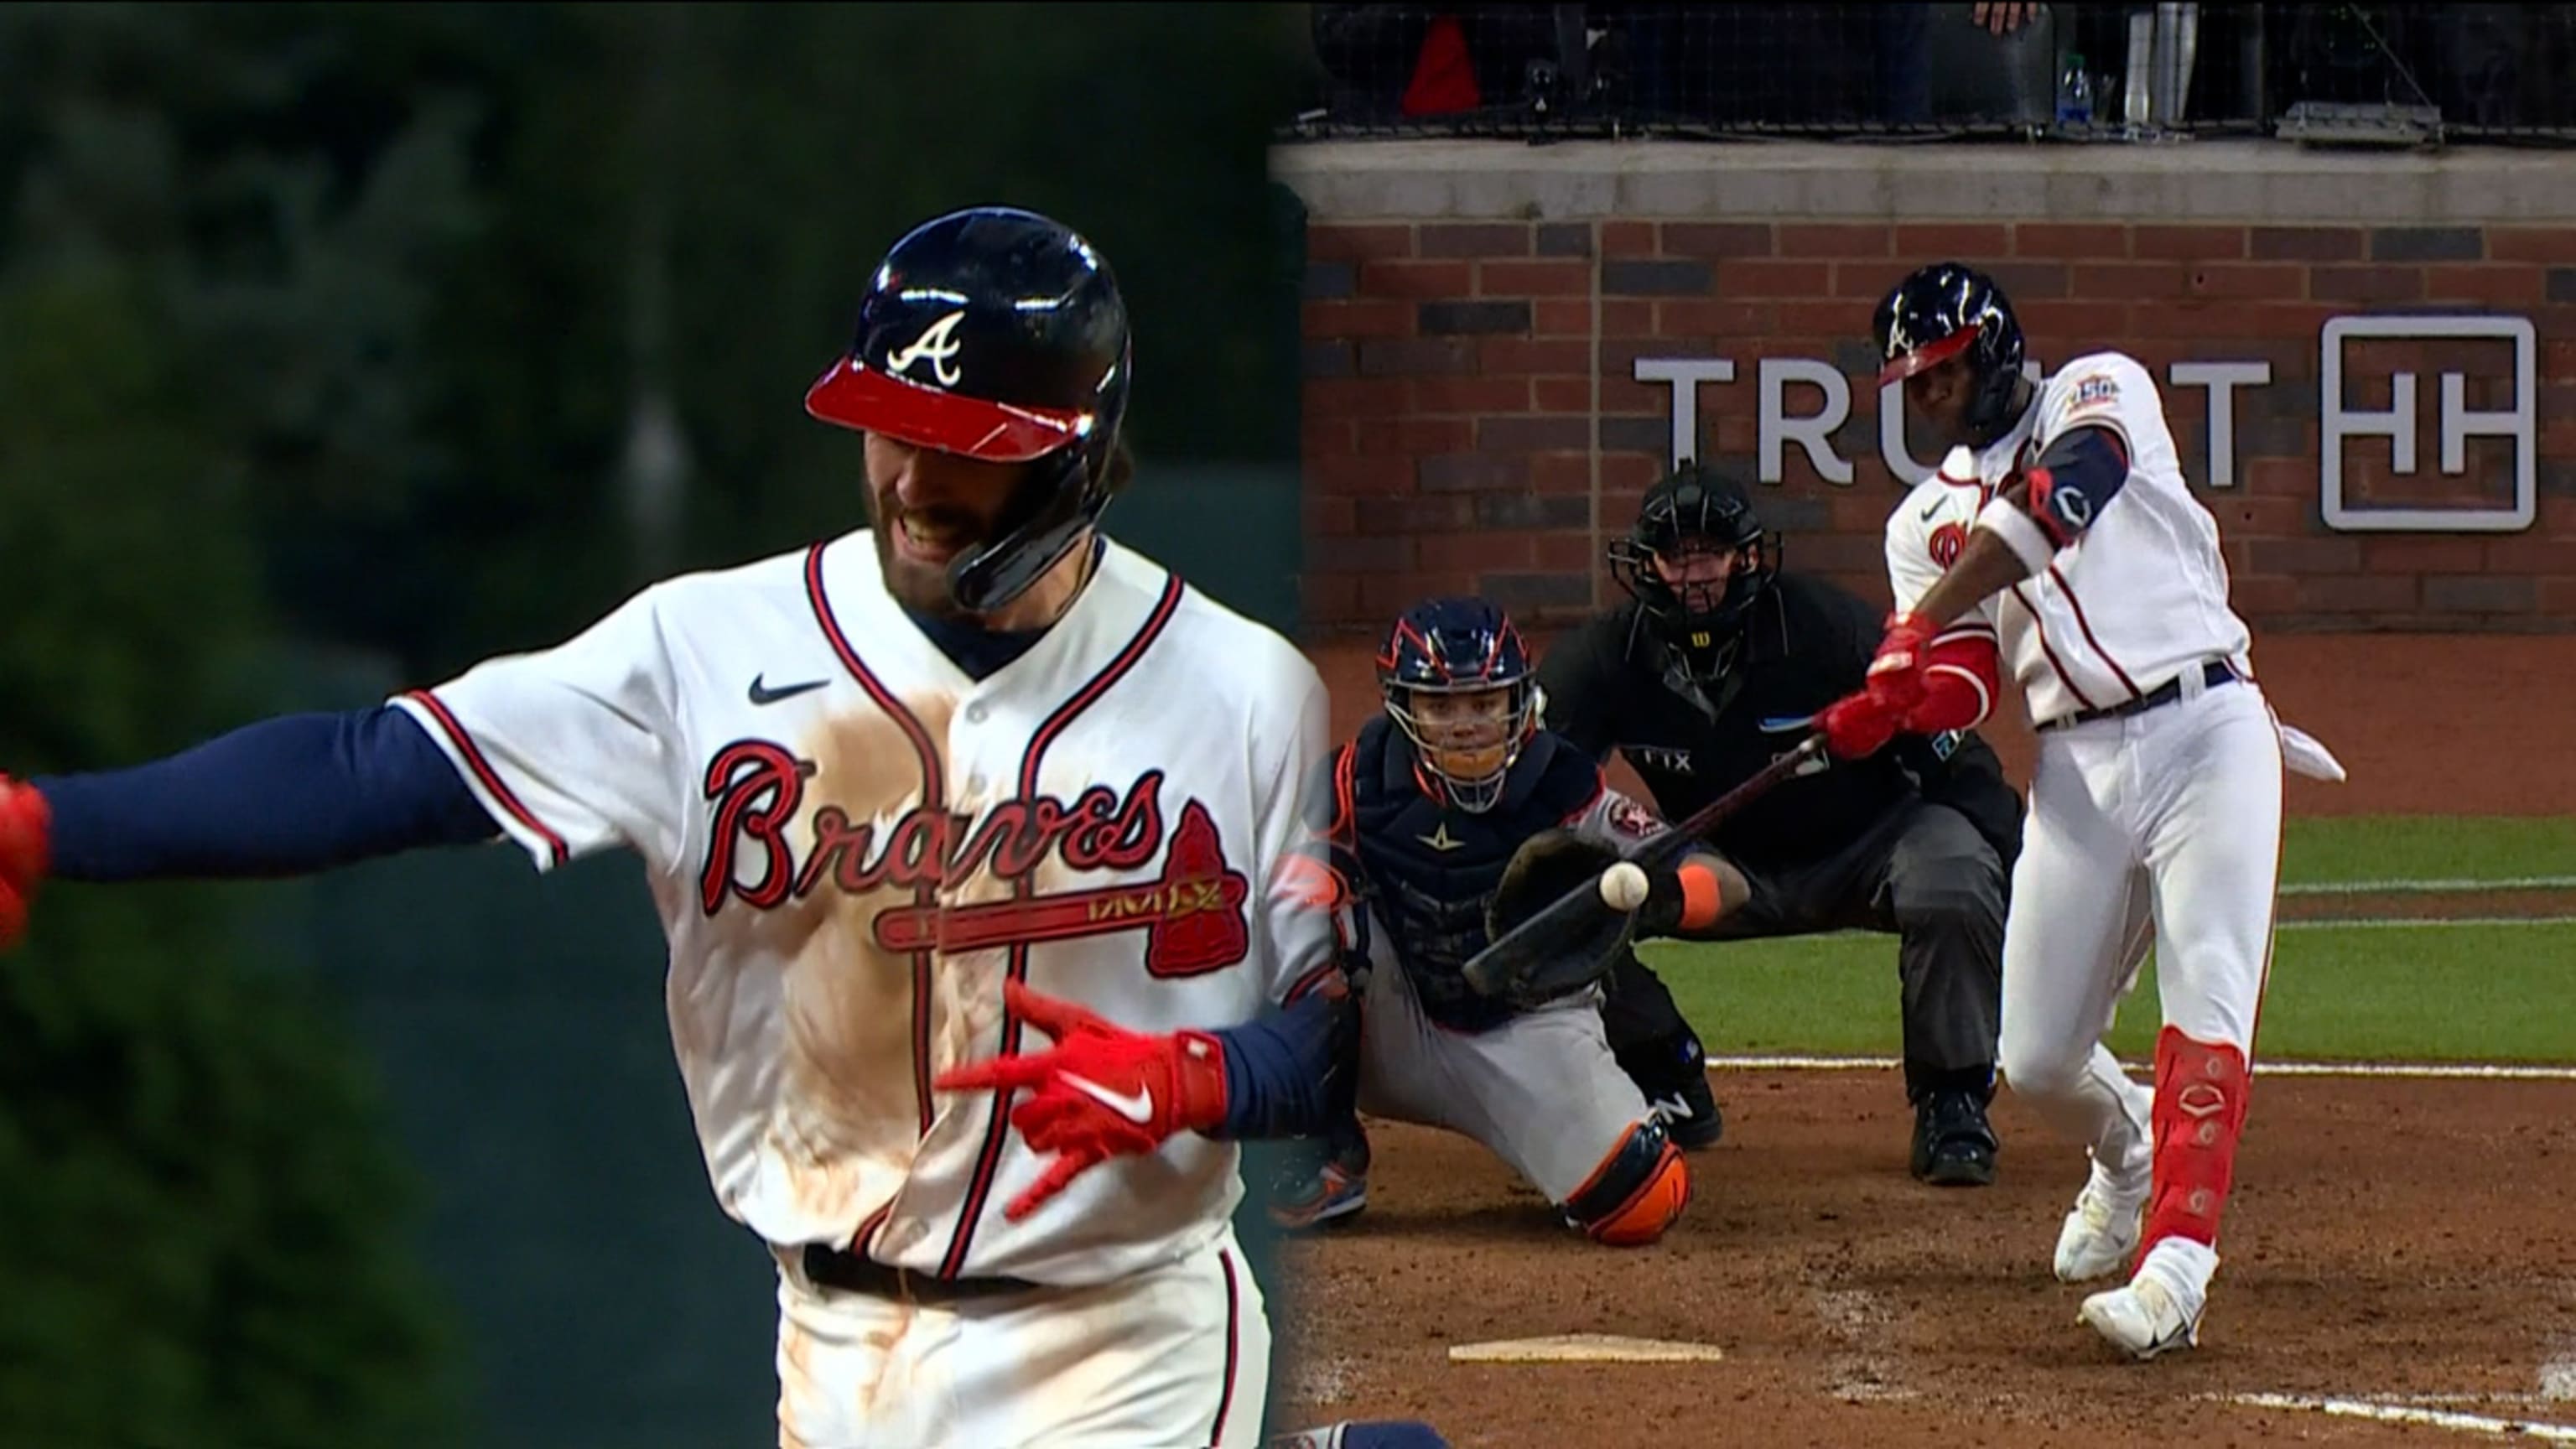 World Series game 4: Braves are just one win away from victory